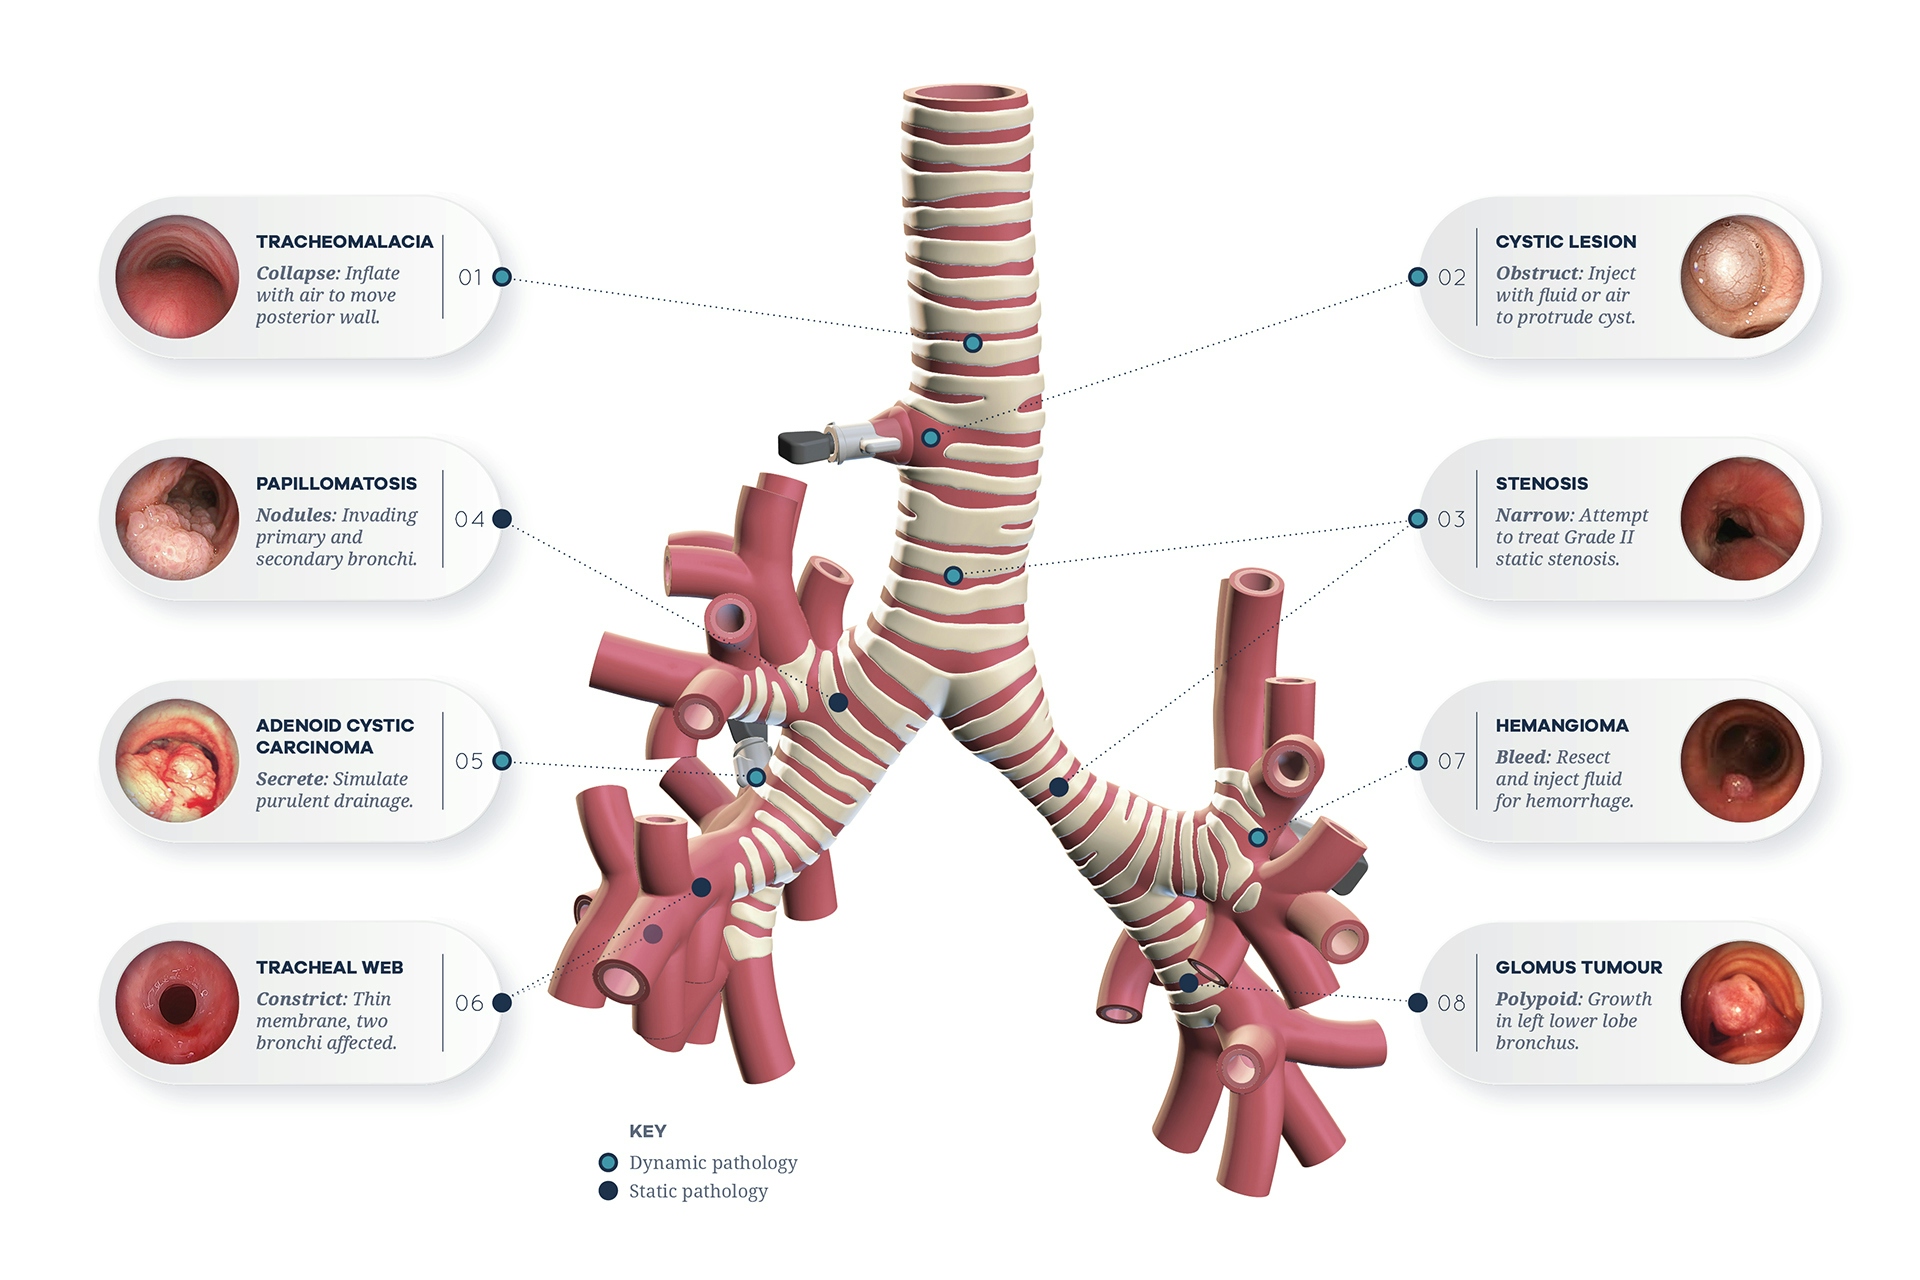 Diagram of dynamic pathology located on inside of simulated trachea.